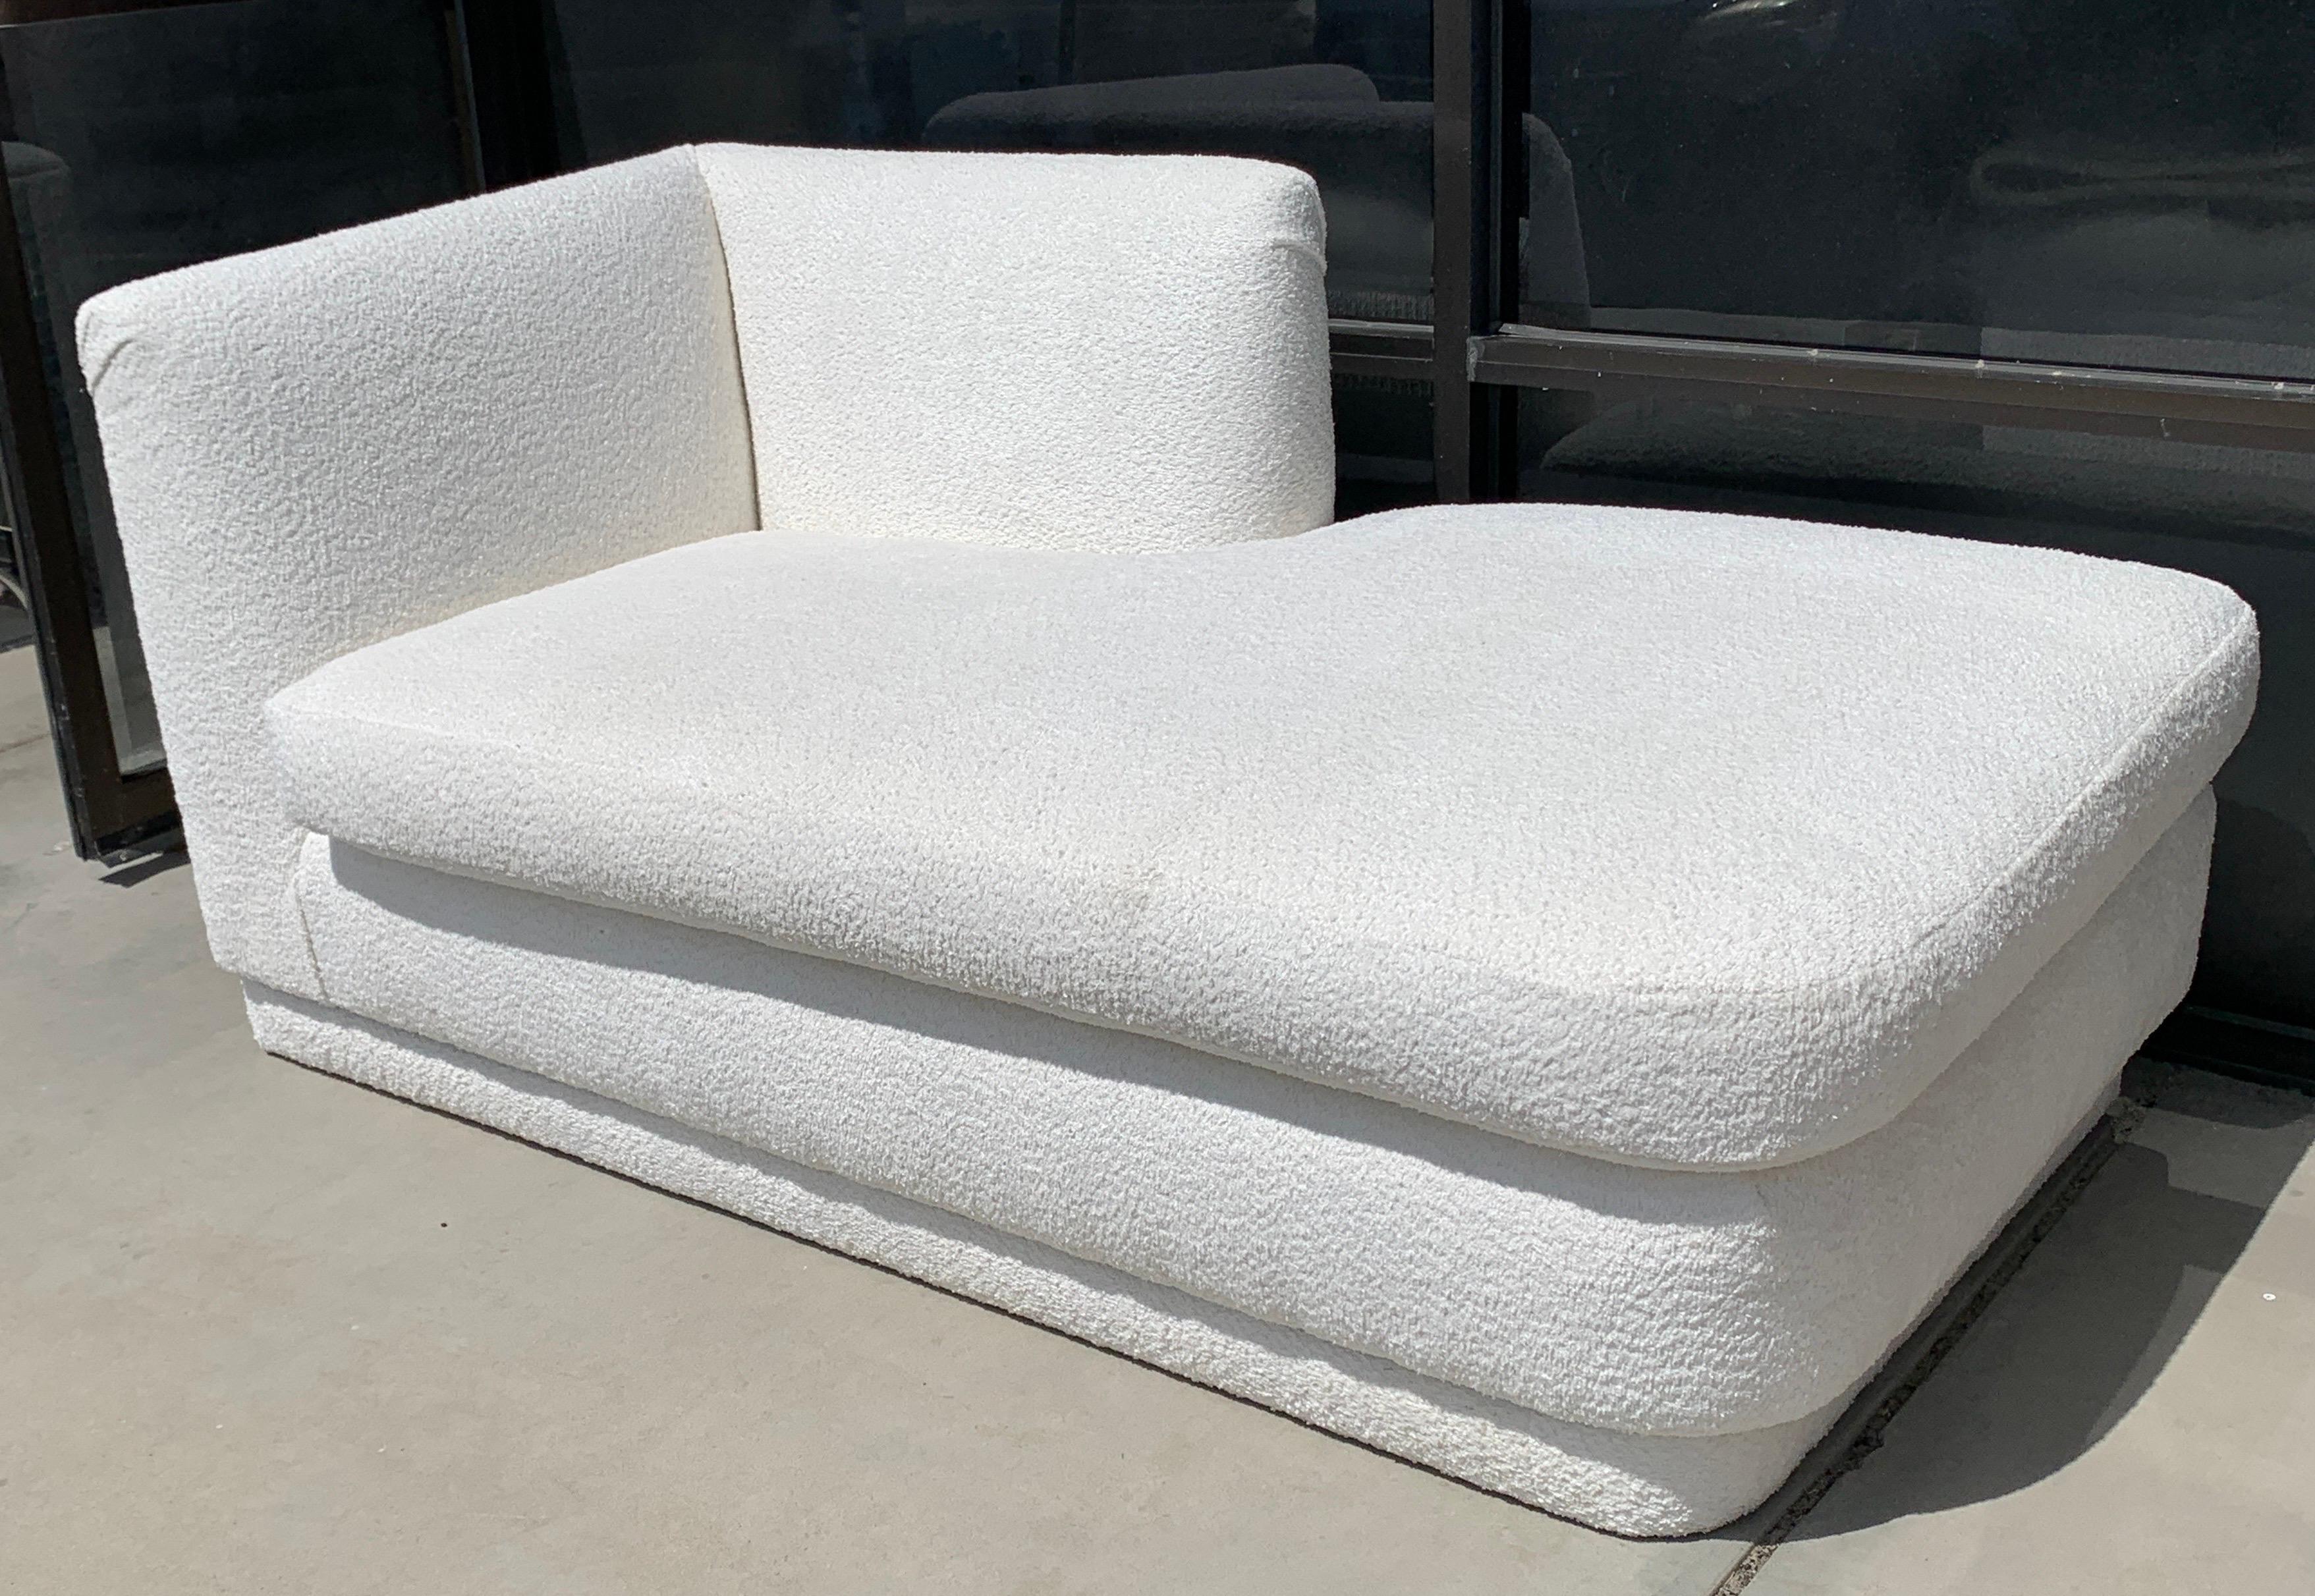 Steve Chaise Off-White Bouclé Chaise Lounge W/ Pair Matching Pillows  im Angebot 1